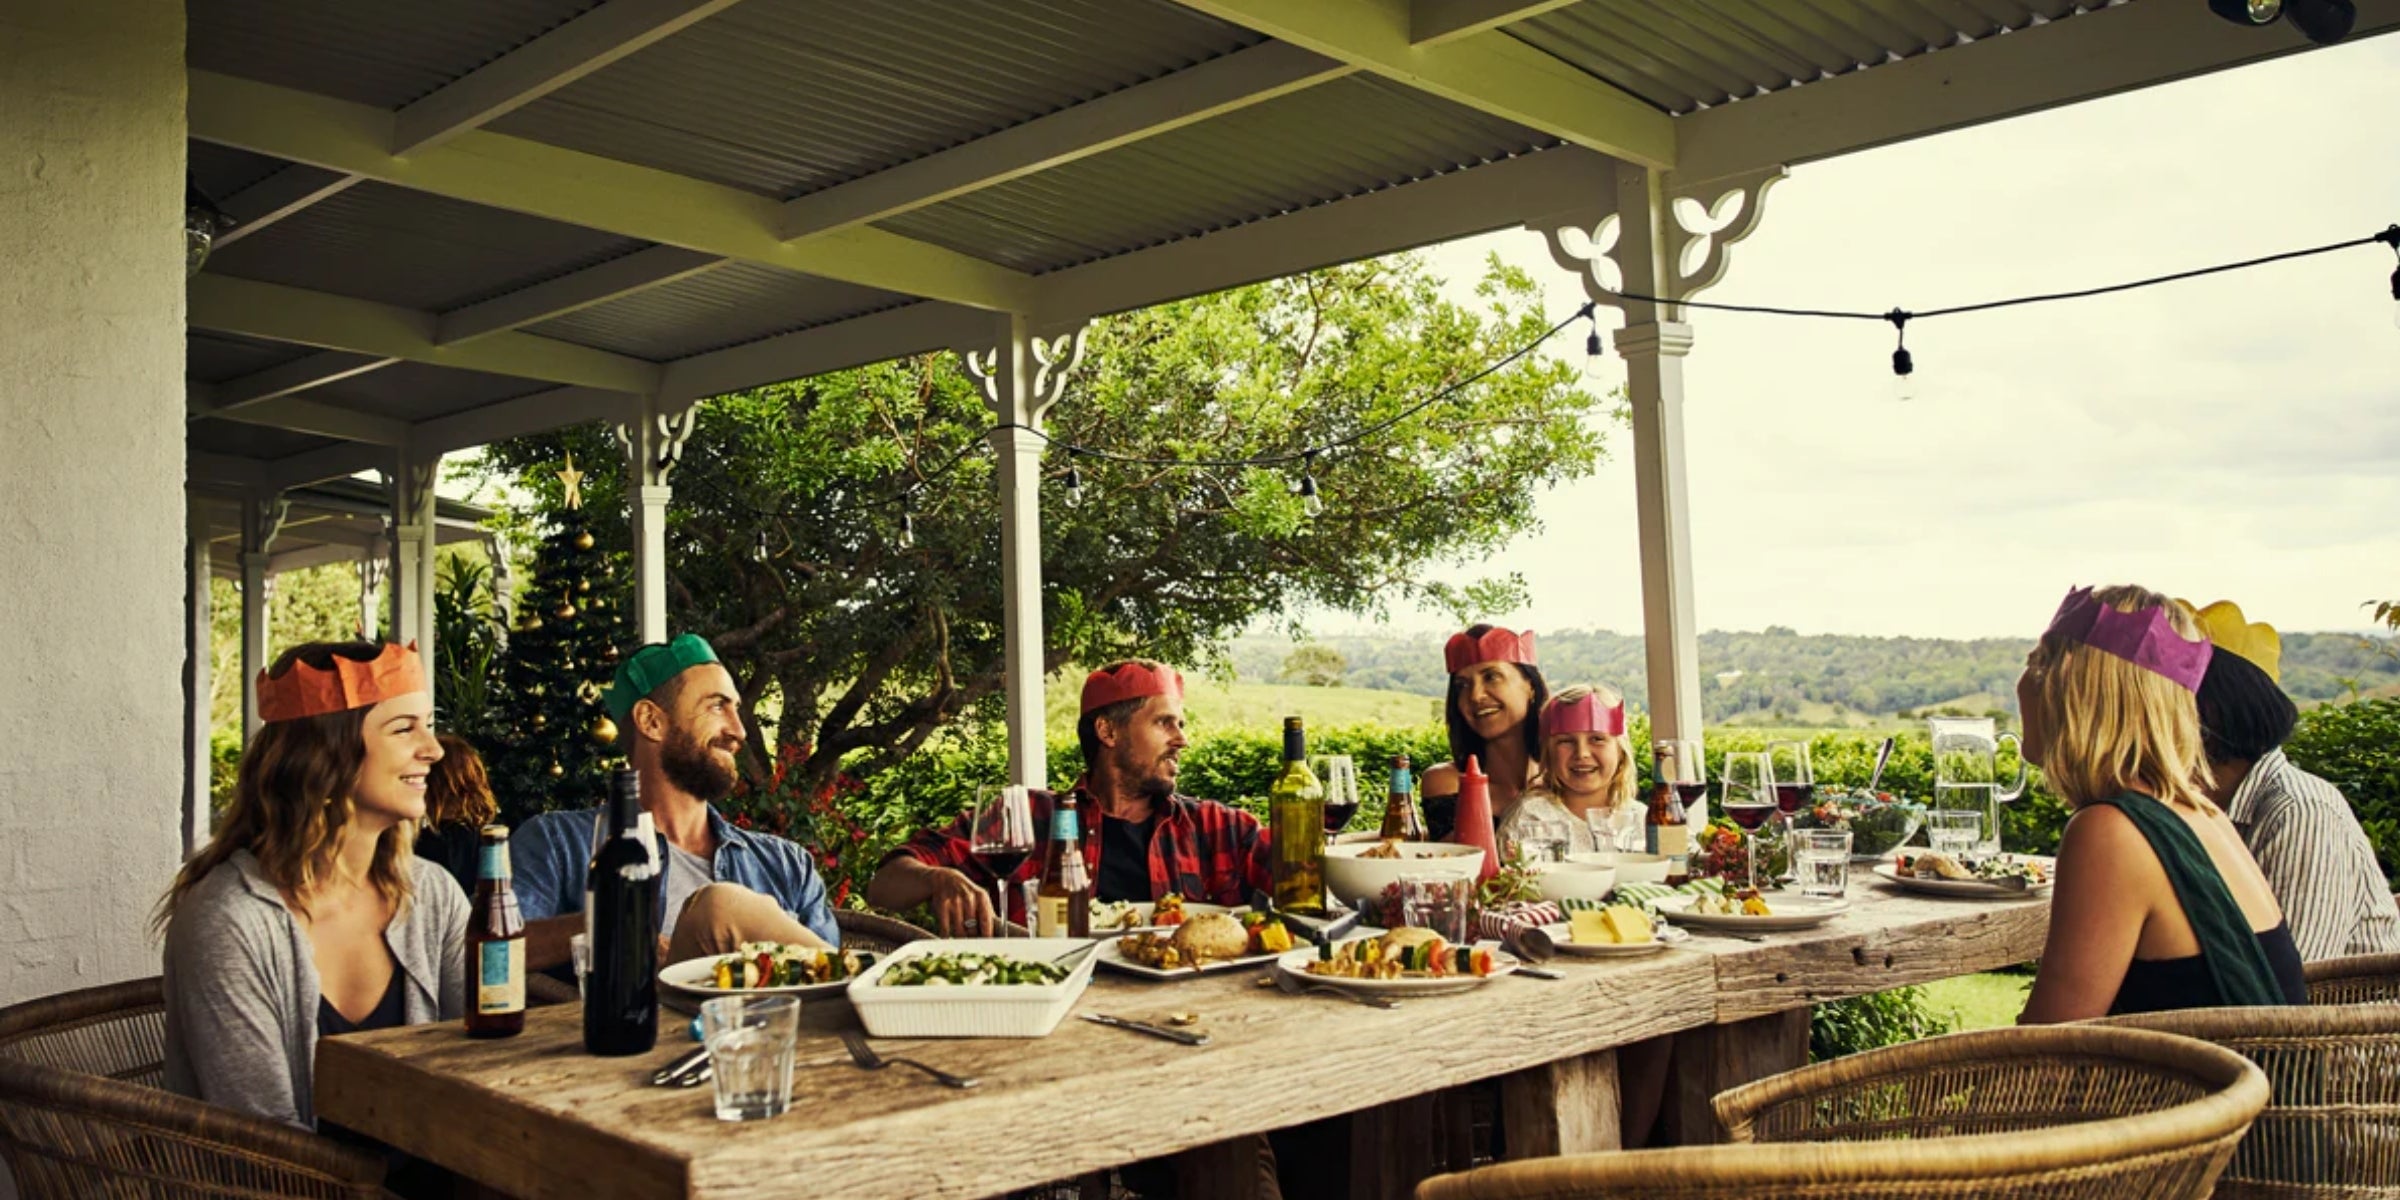 a group of people enjoying a meal outdoors on a patio with a scenic view of greenery in the background